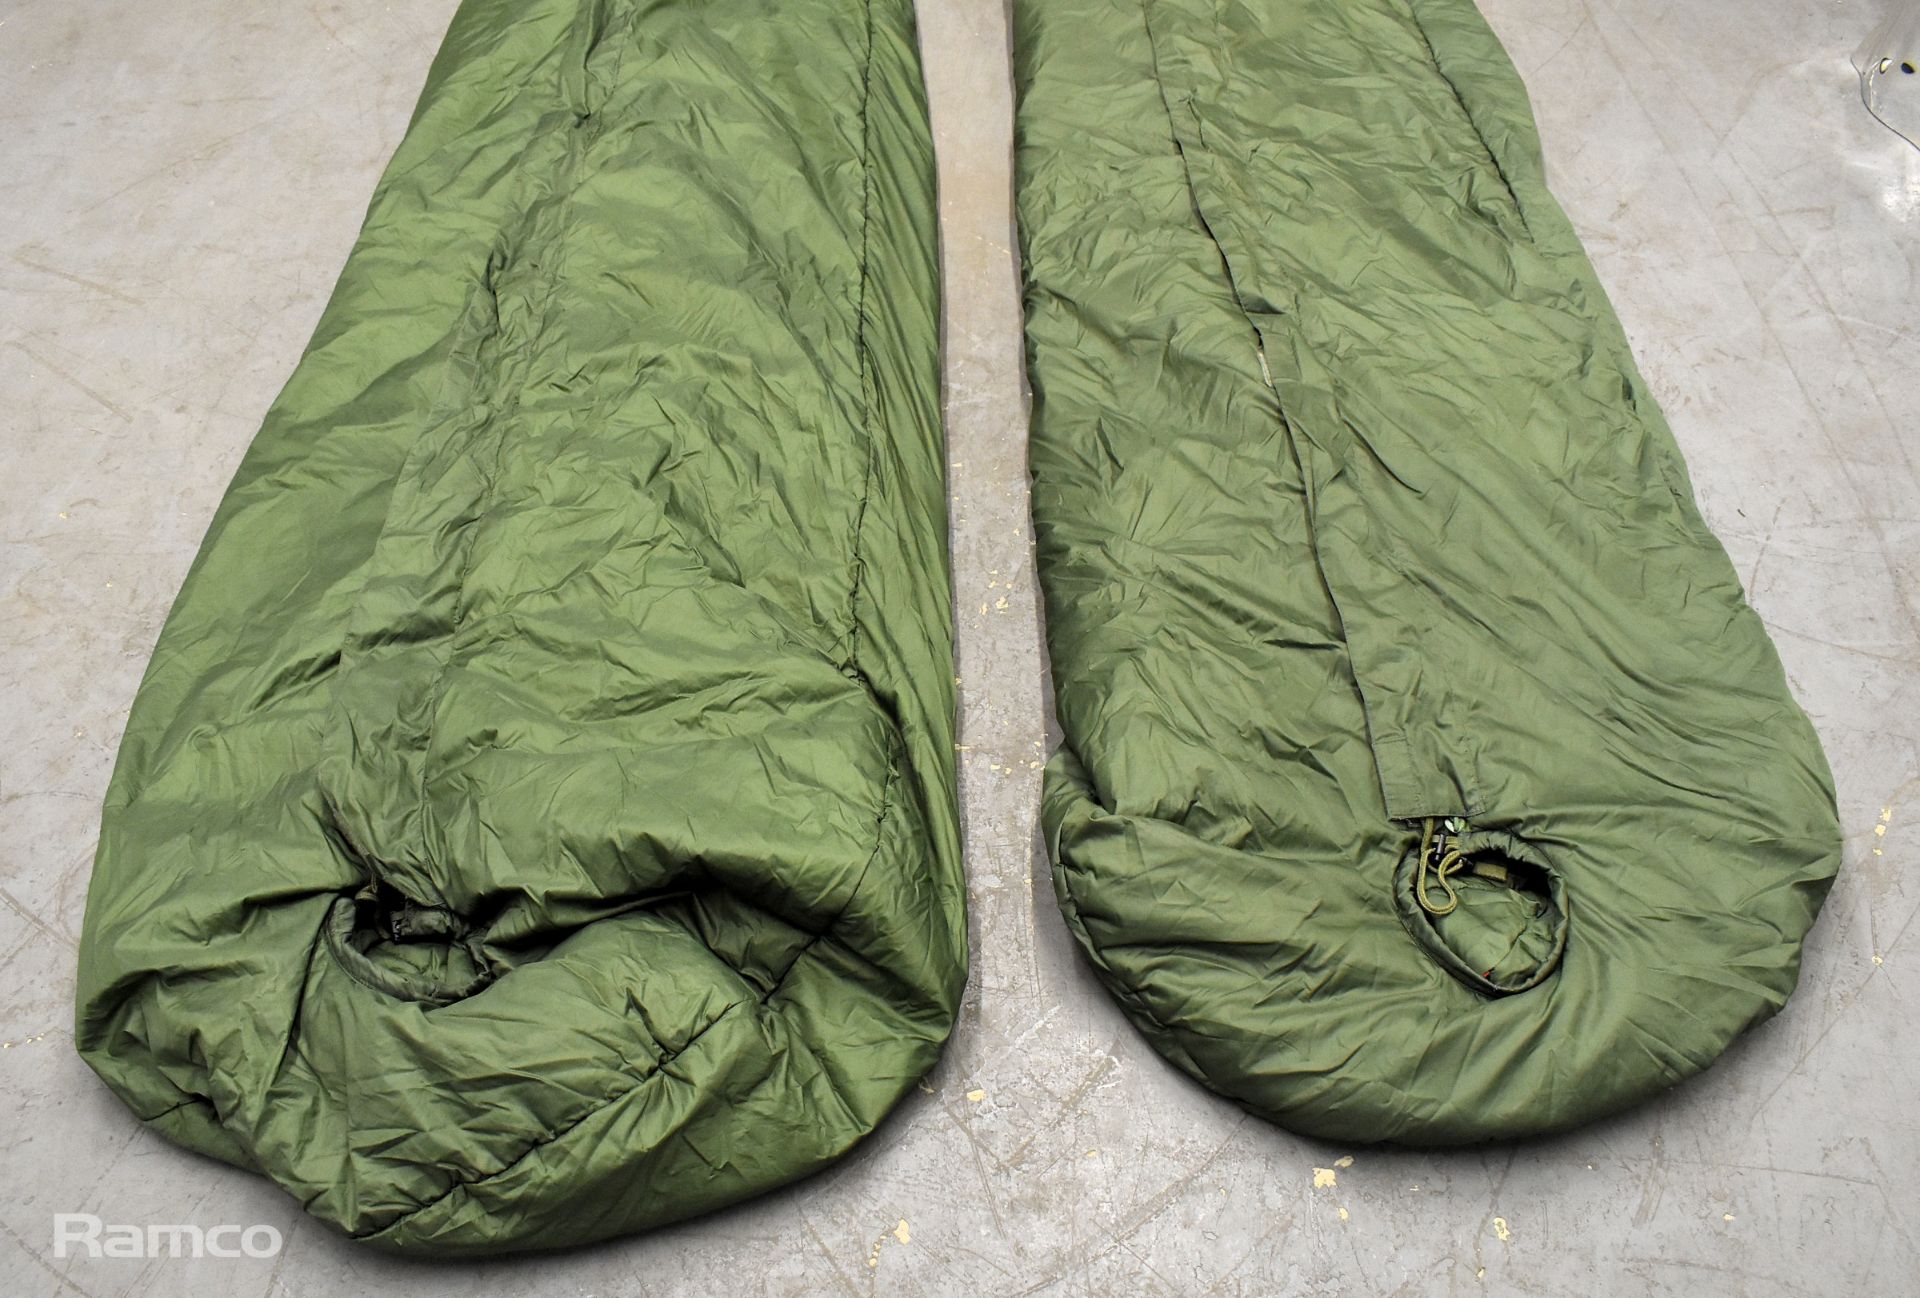 31x Sleeping bags - mixed grades and sizes - Image 5 of 8